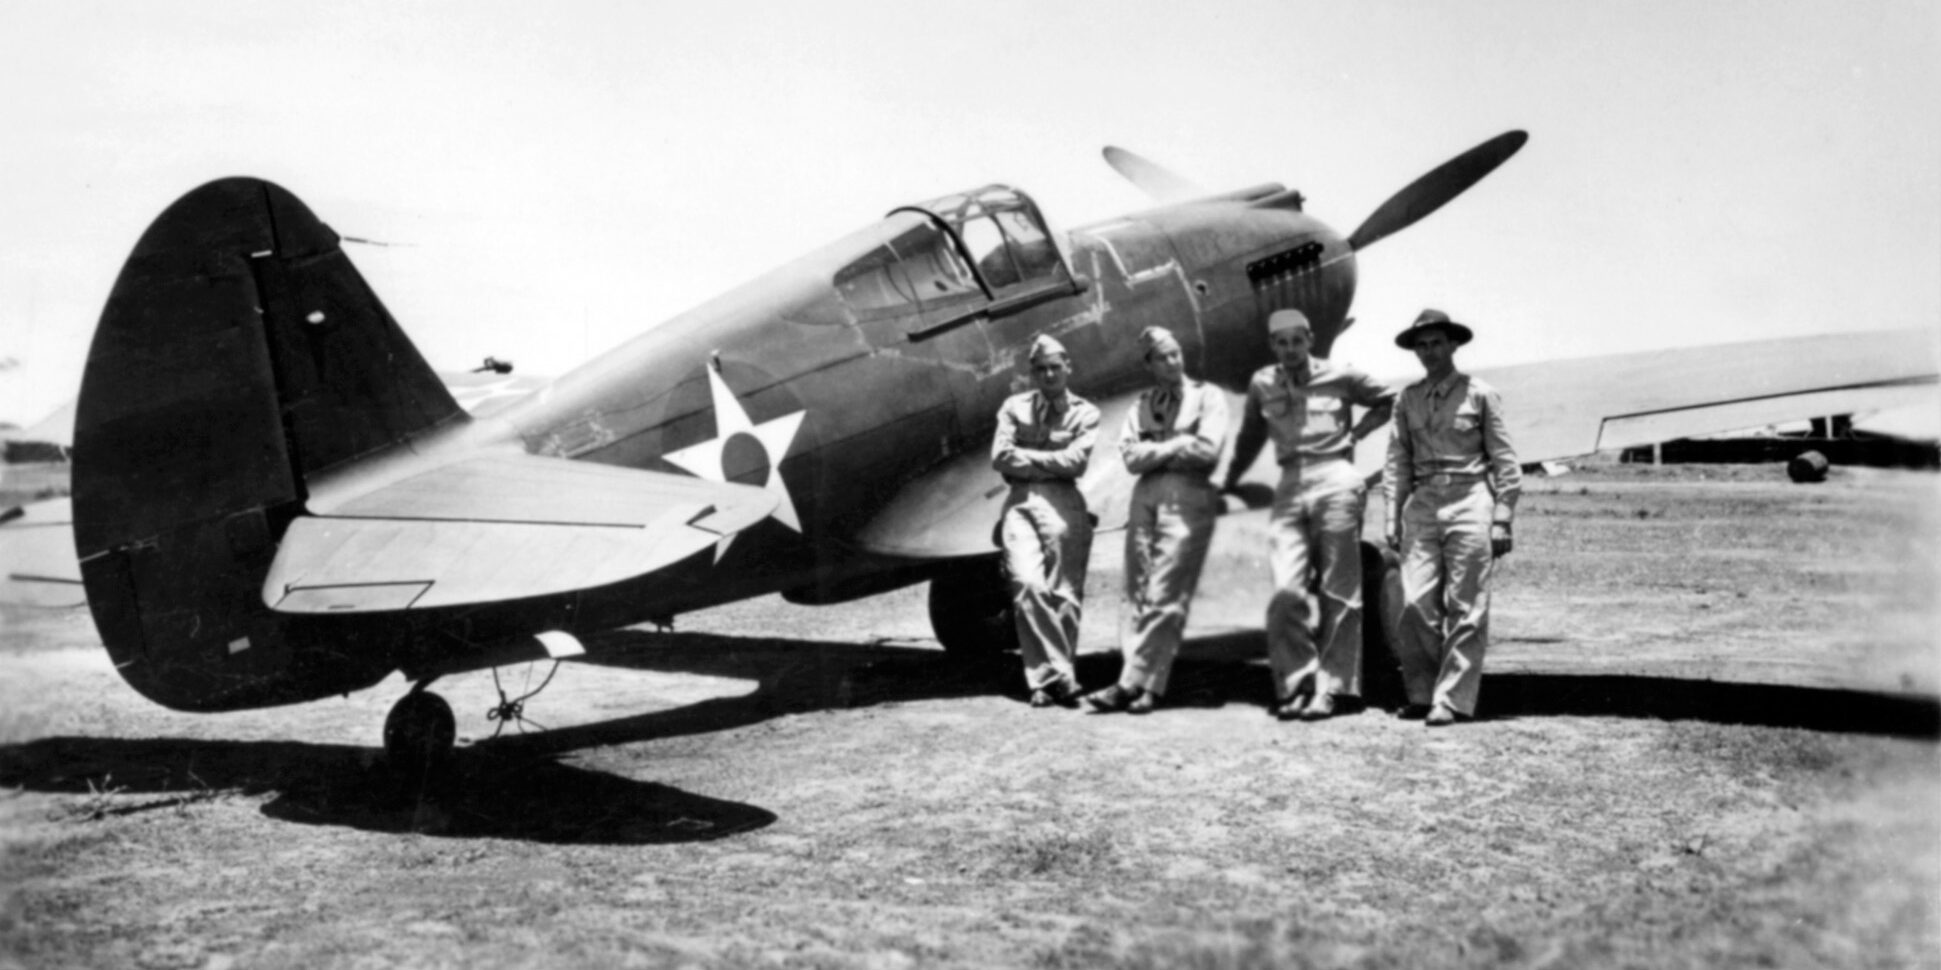 Several American pilots pose at Clark Field in August 1941. Standing left to right are: Carl Gies, Max Louk, Erwin Crellin, and Varian Kieler.